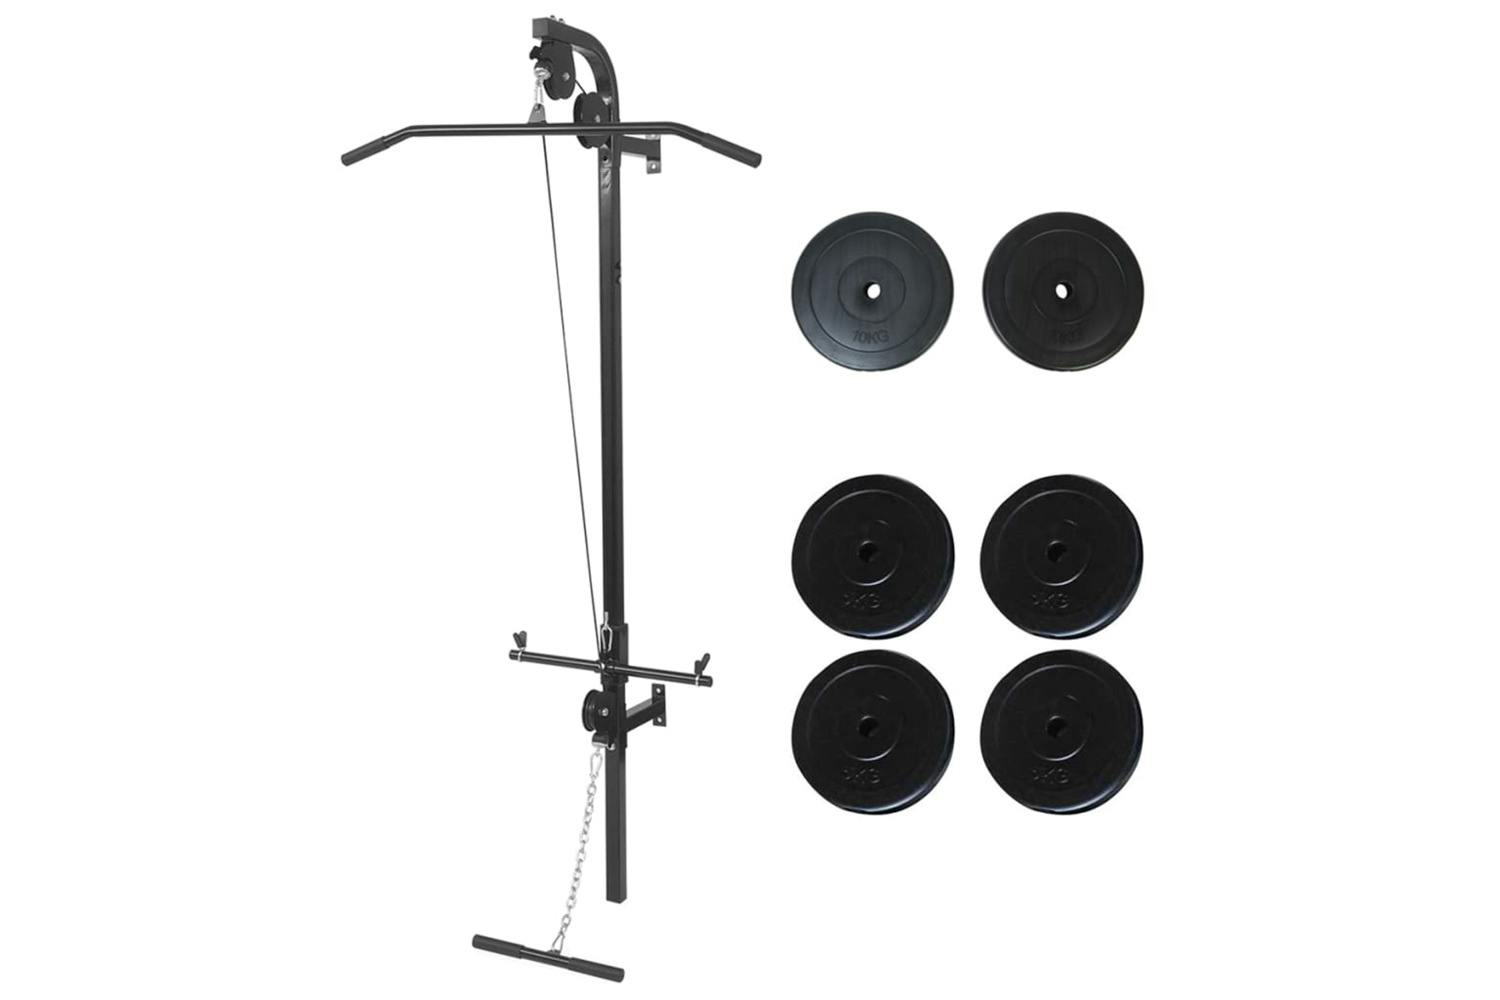 Vidaxl 275359 Wall-mounted Power Tower With Weight Plates 40 Kg